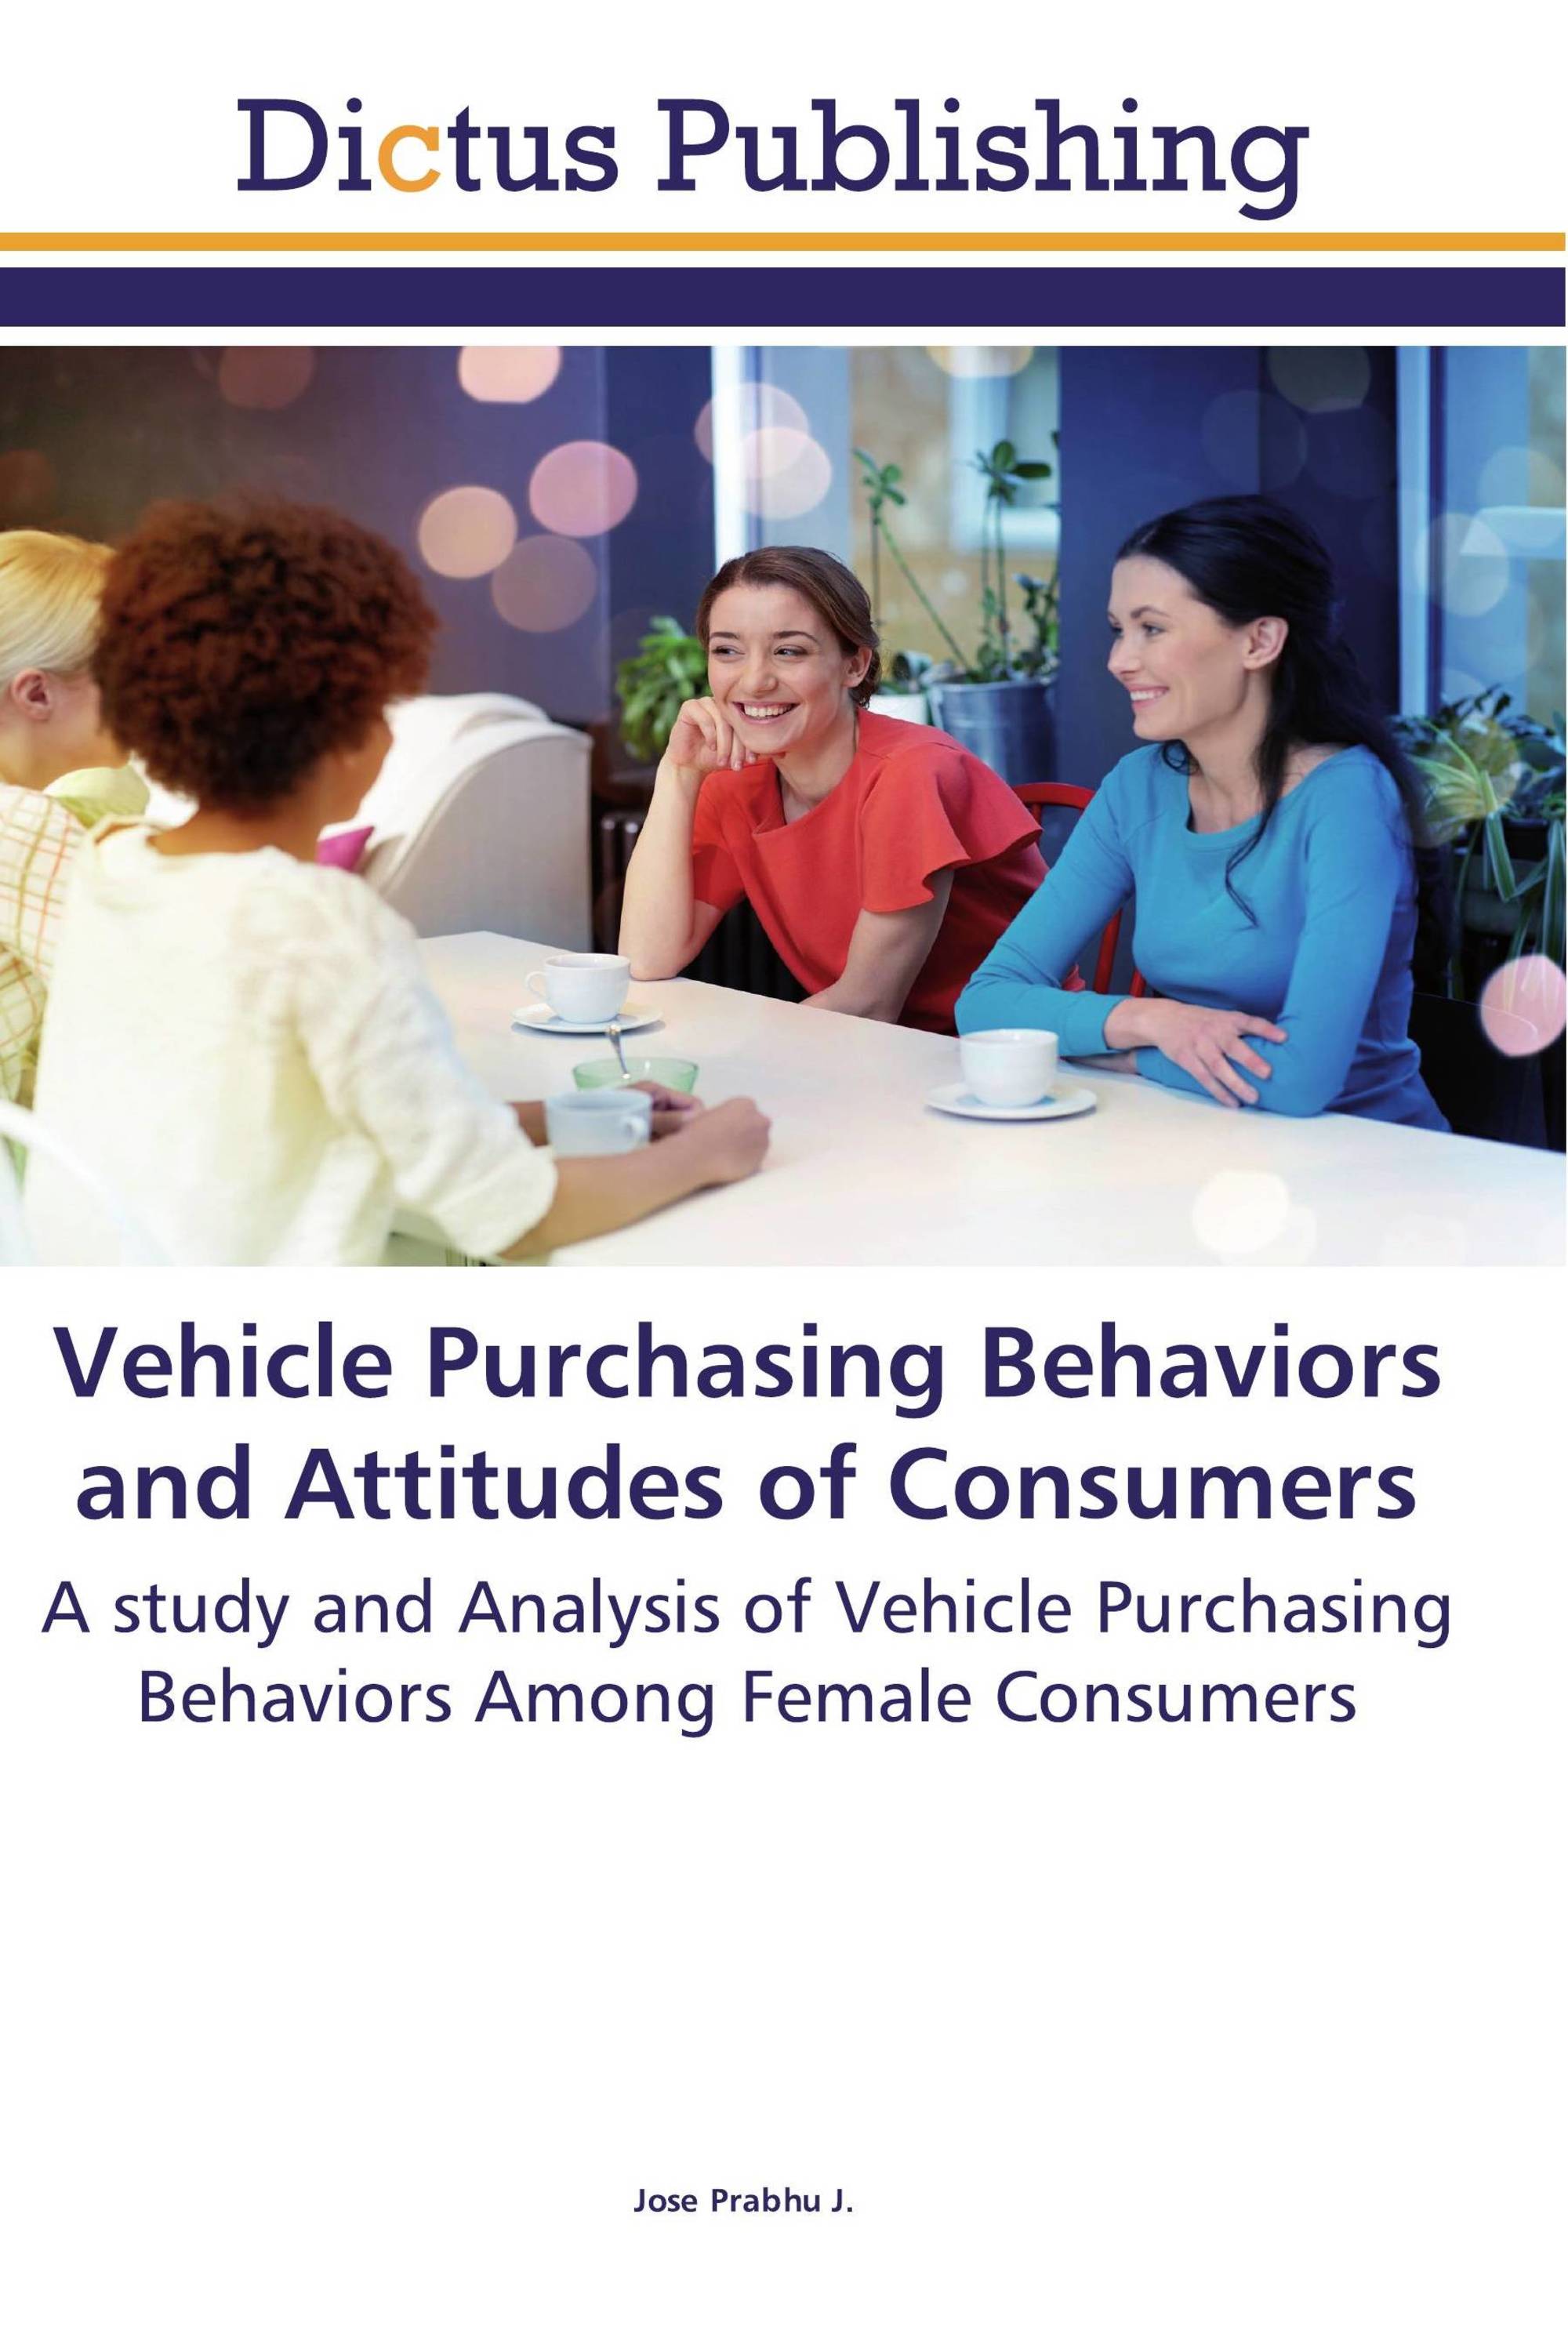 Vehicle Purchasing Behaviors and Attitudes of Consumers